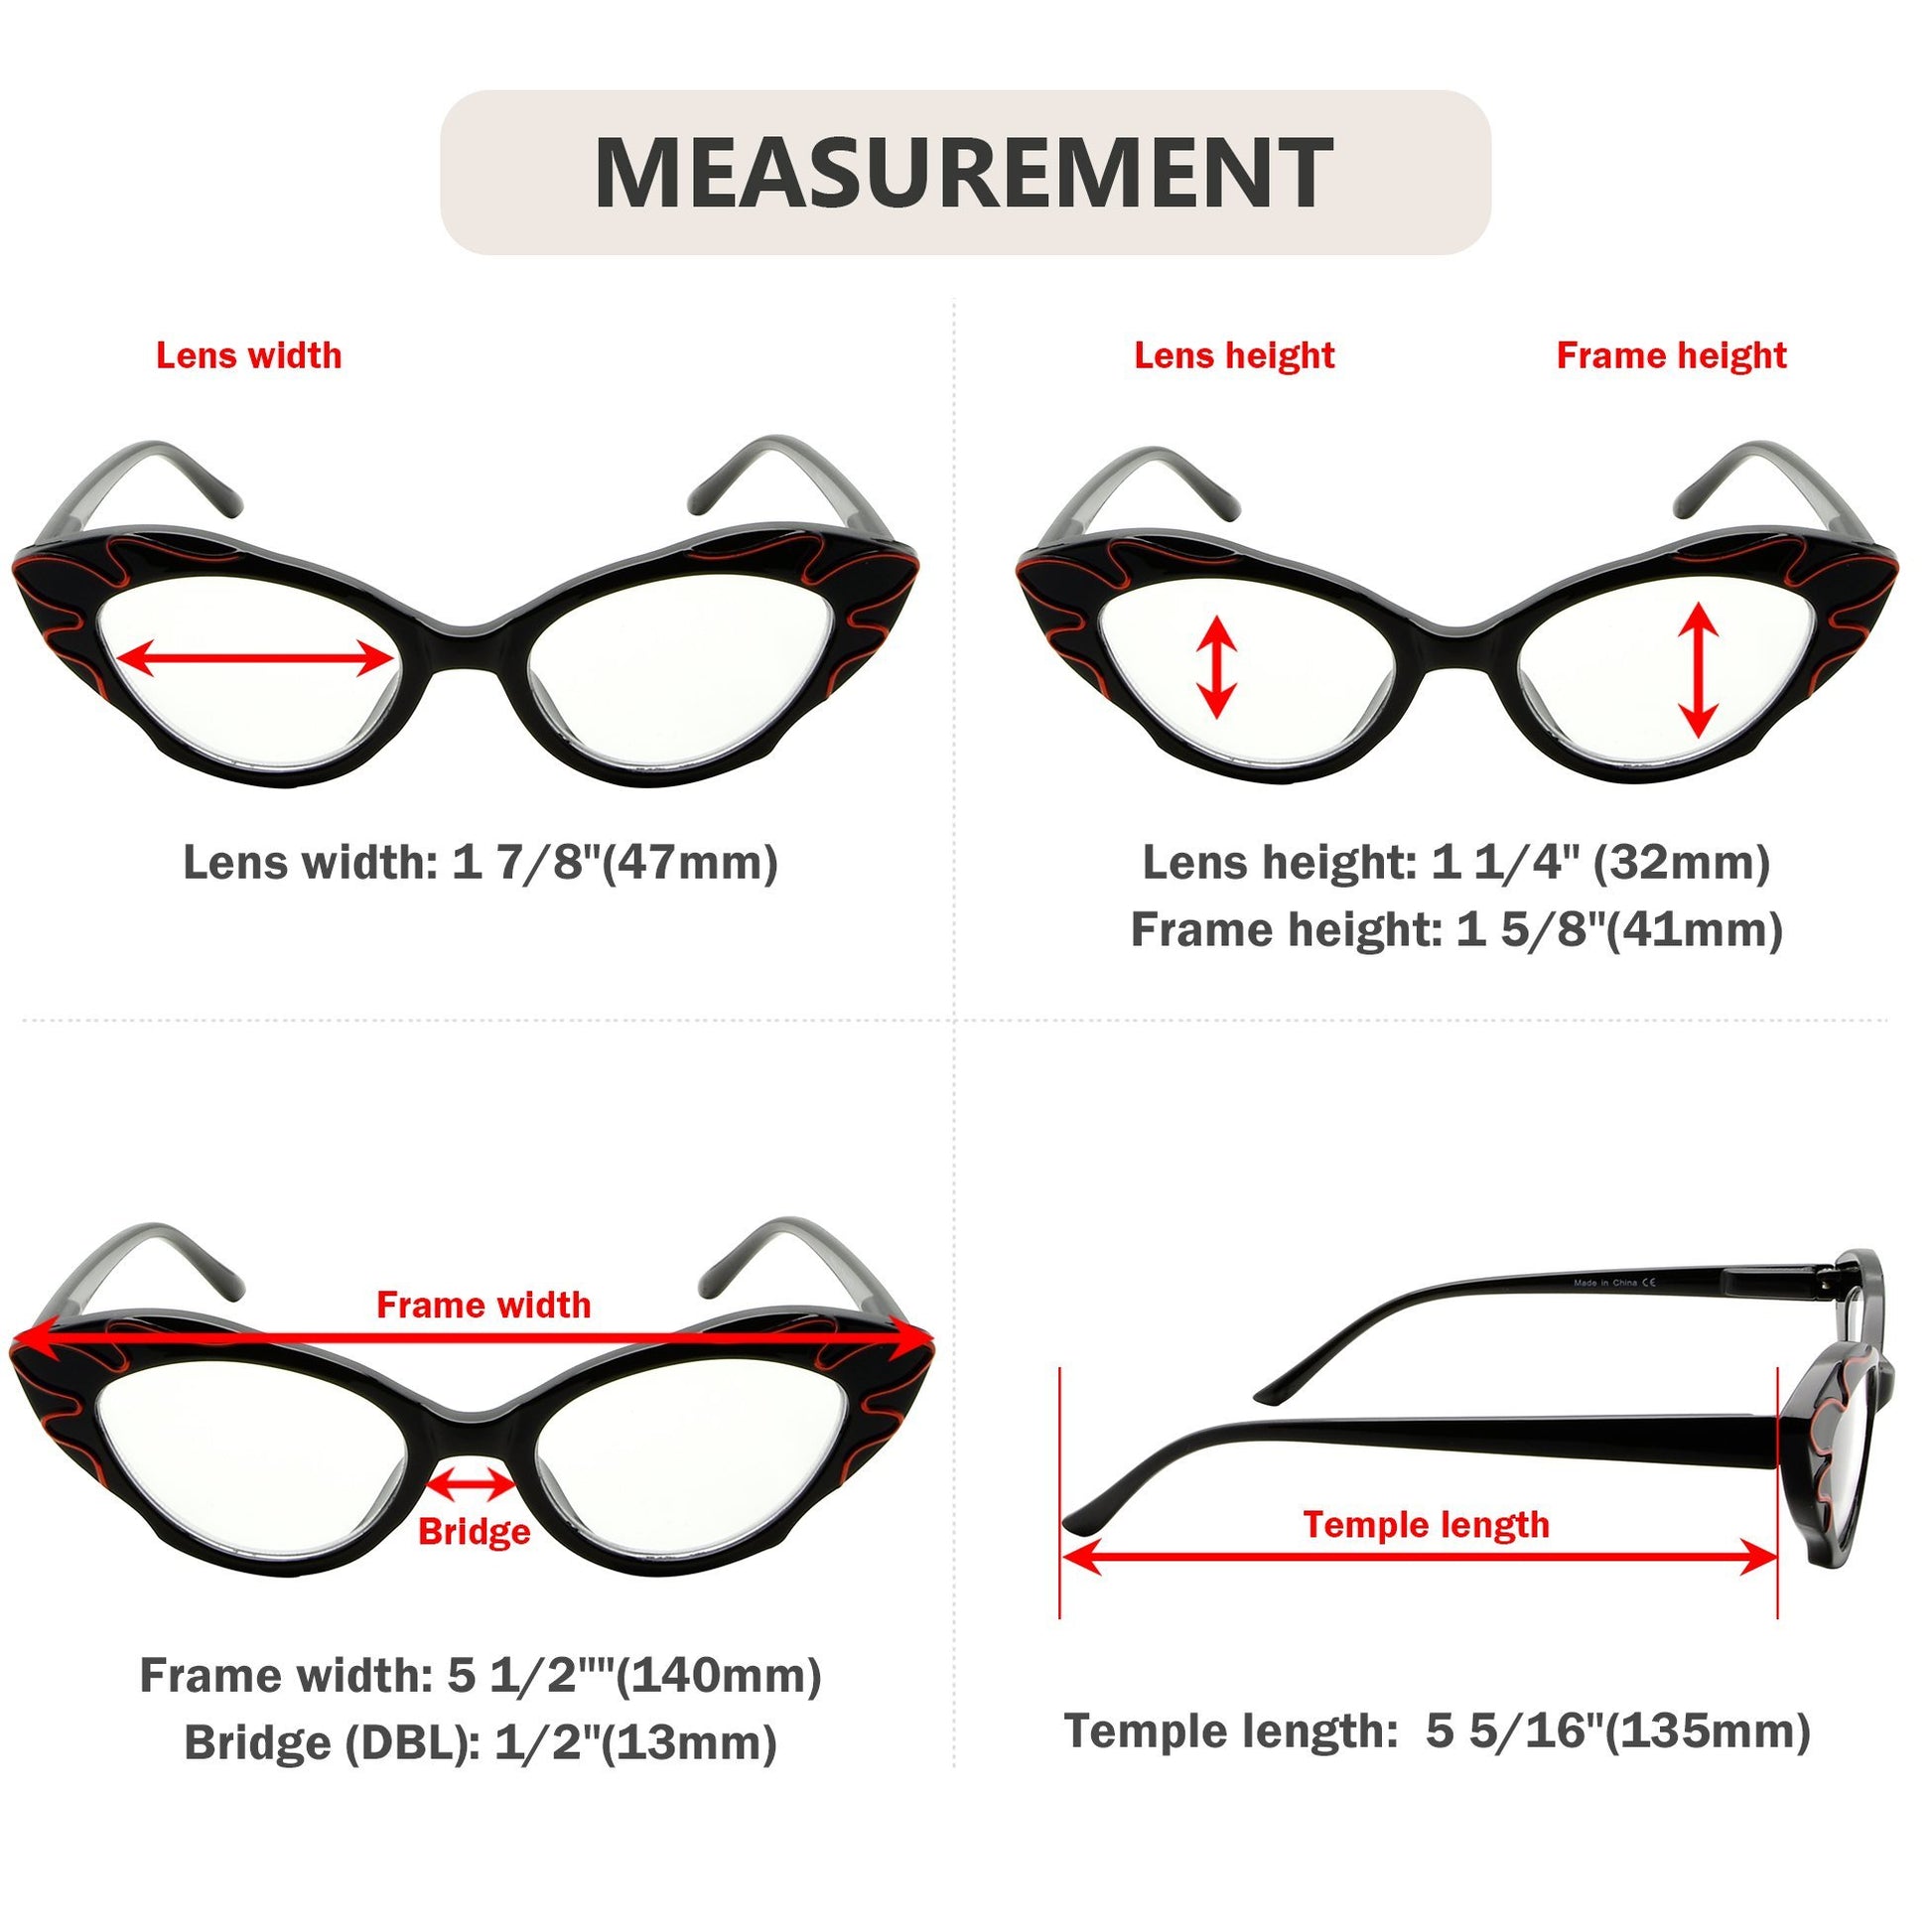 5 Pack Floral Pattern Design Reading Glasses for Women R2106 - 5 Pairs Mix +1.25